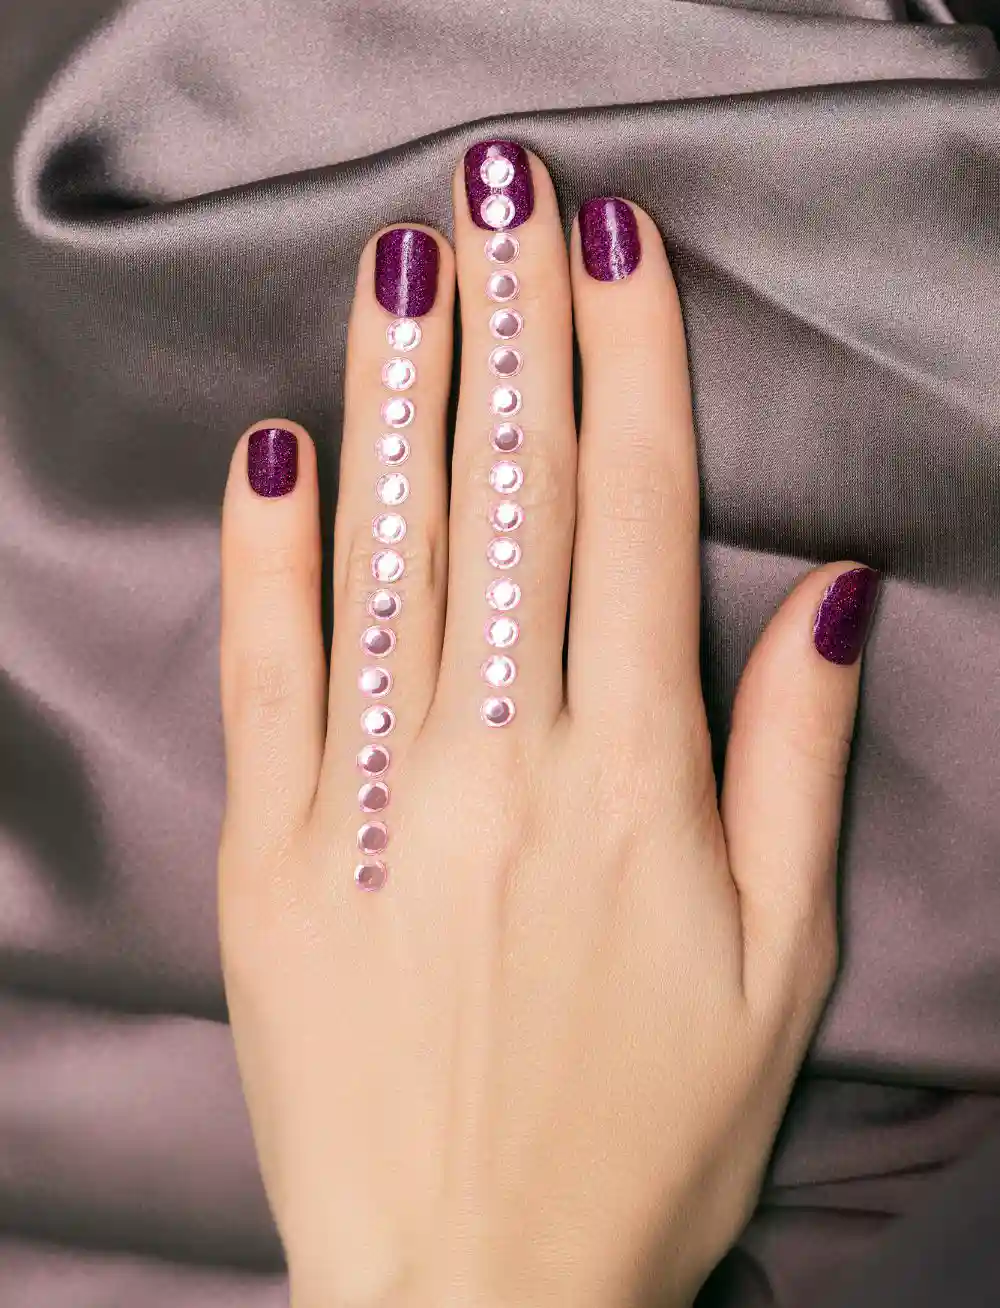 Model hand with purple manicure